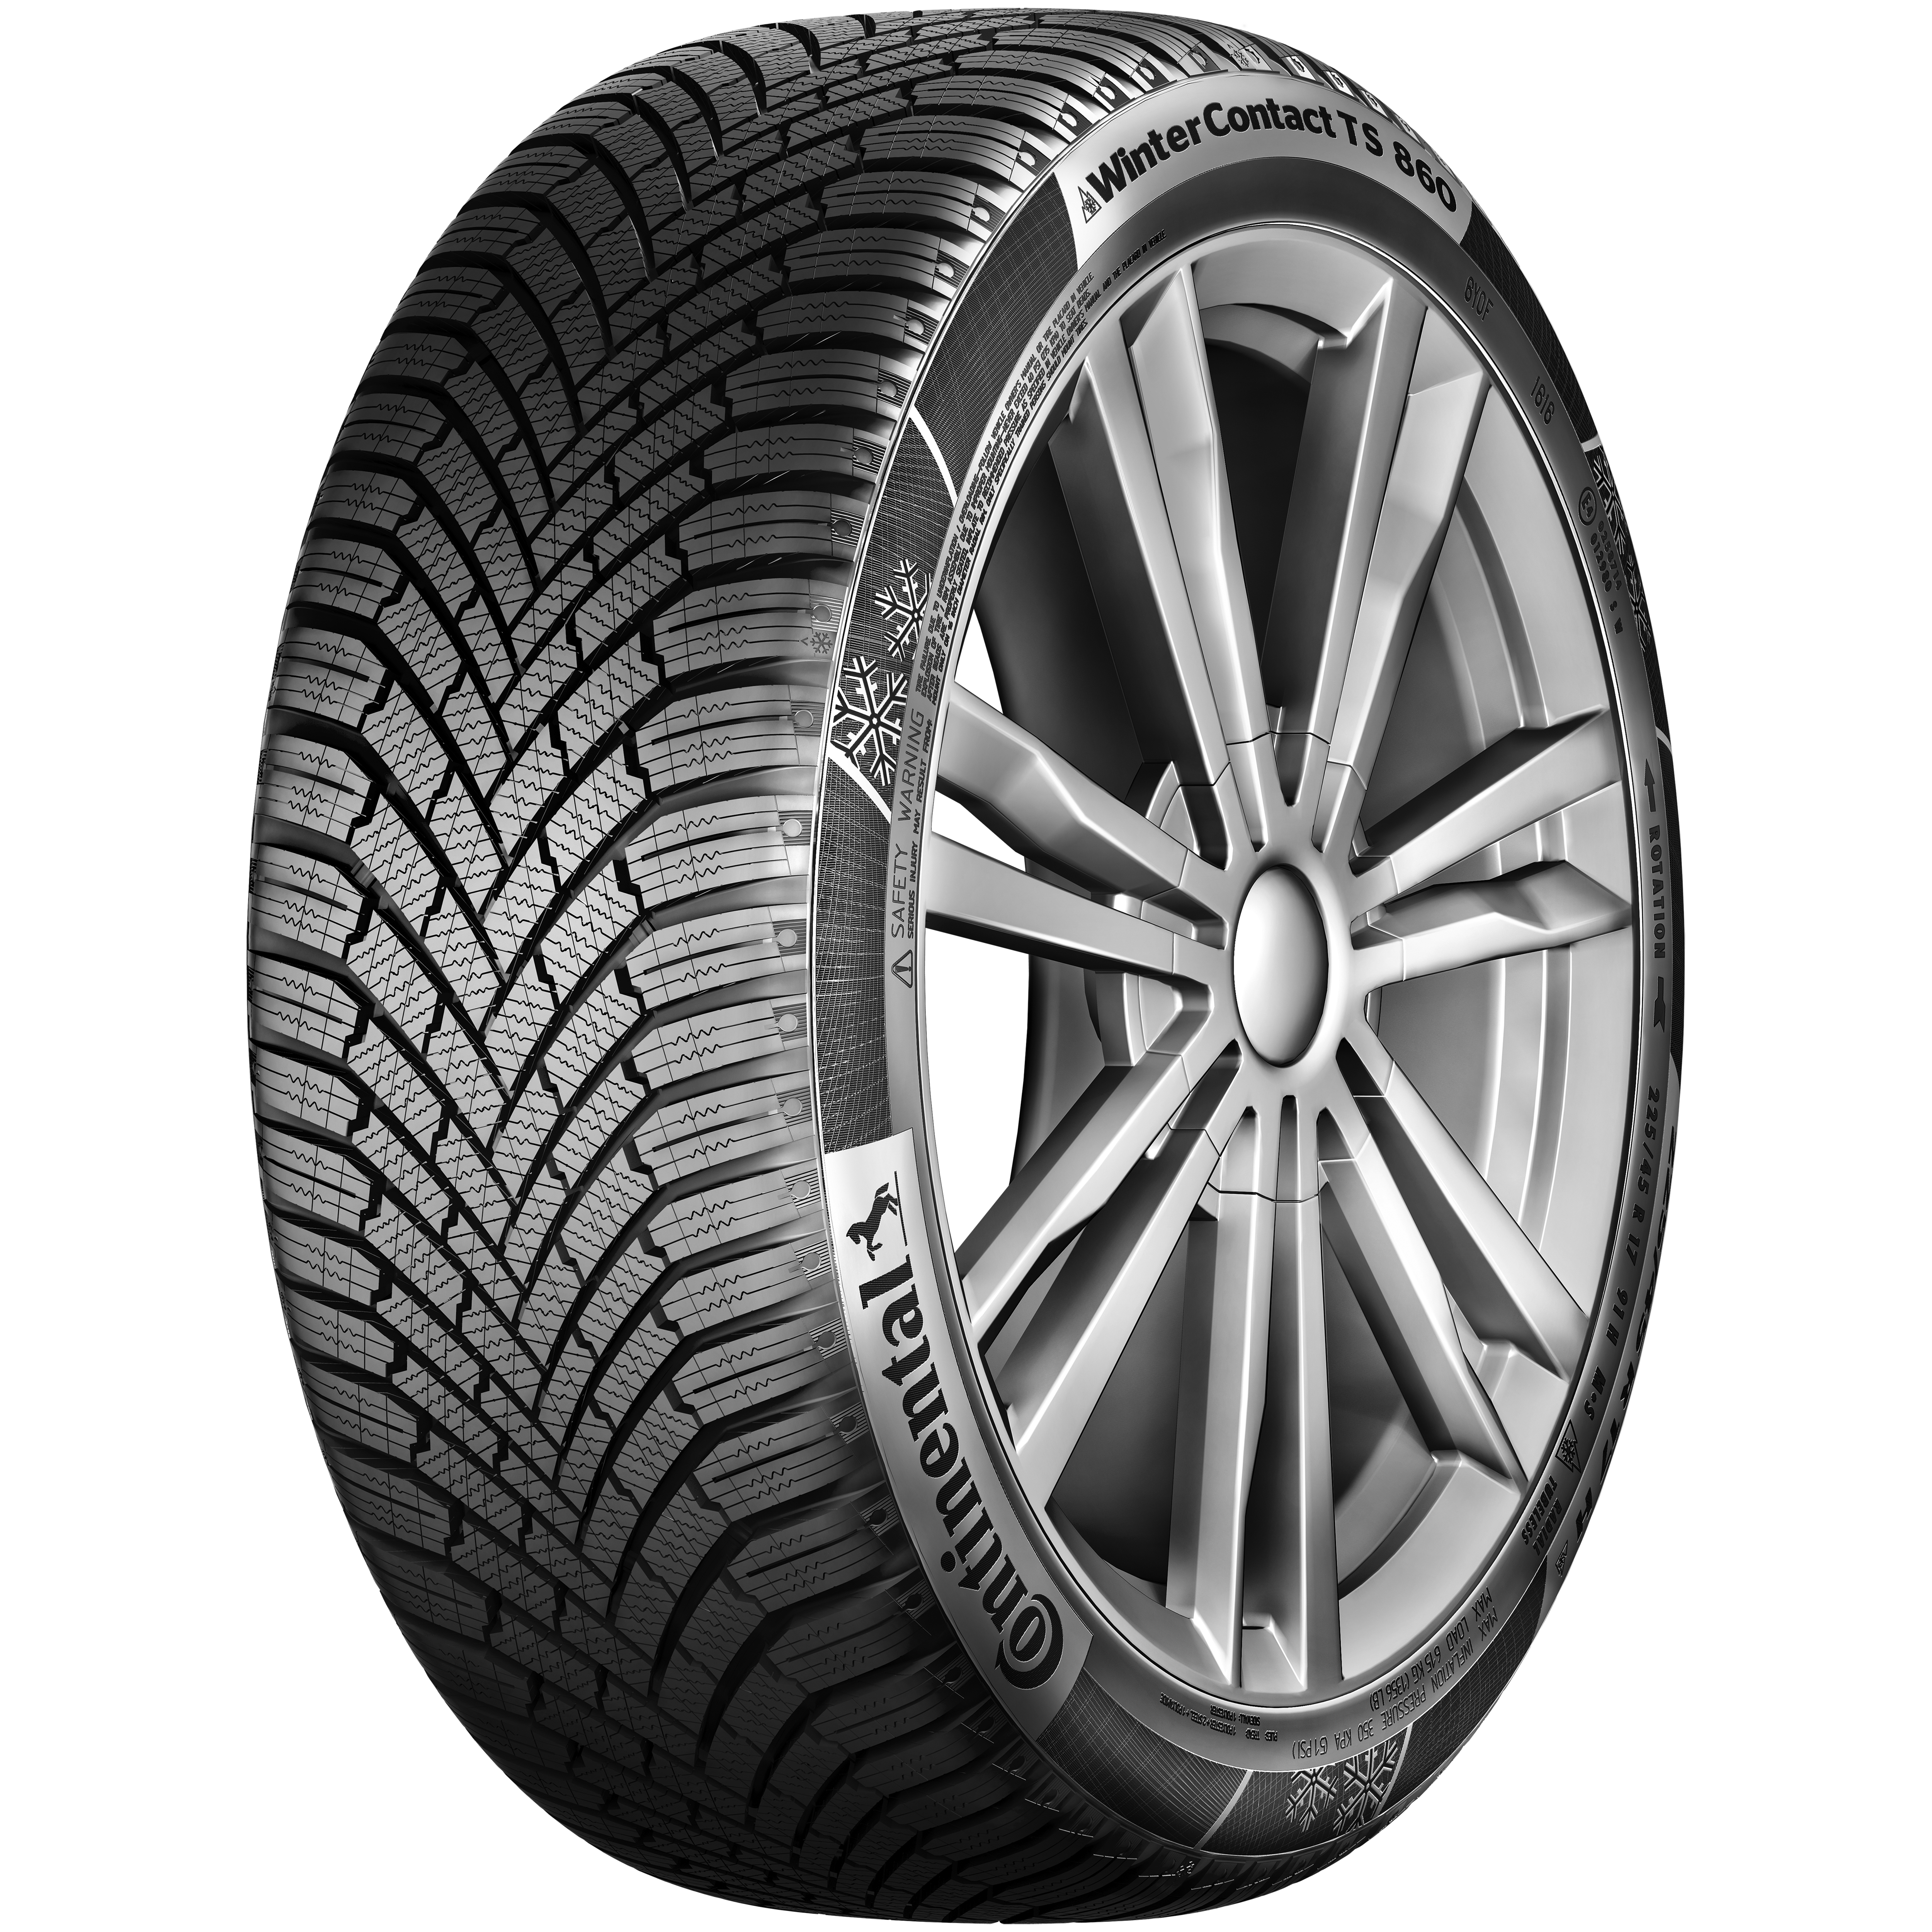 tires can\'t trust winter, trust just 860: the TS When WinterContact your you